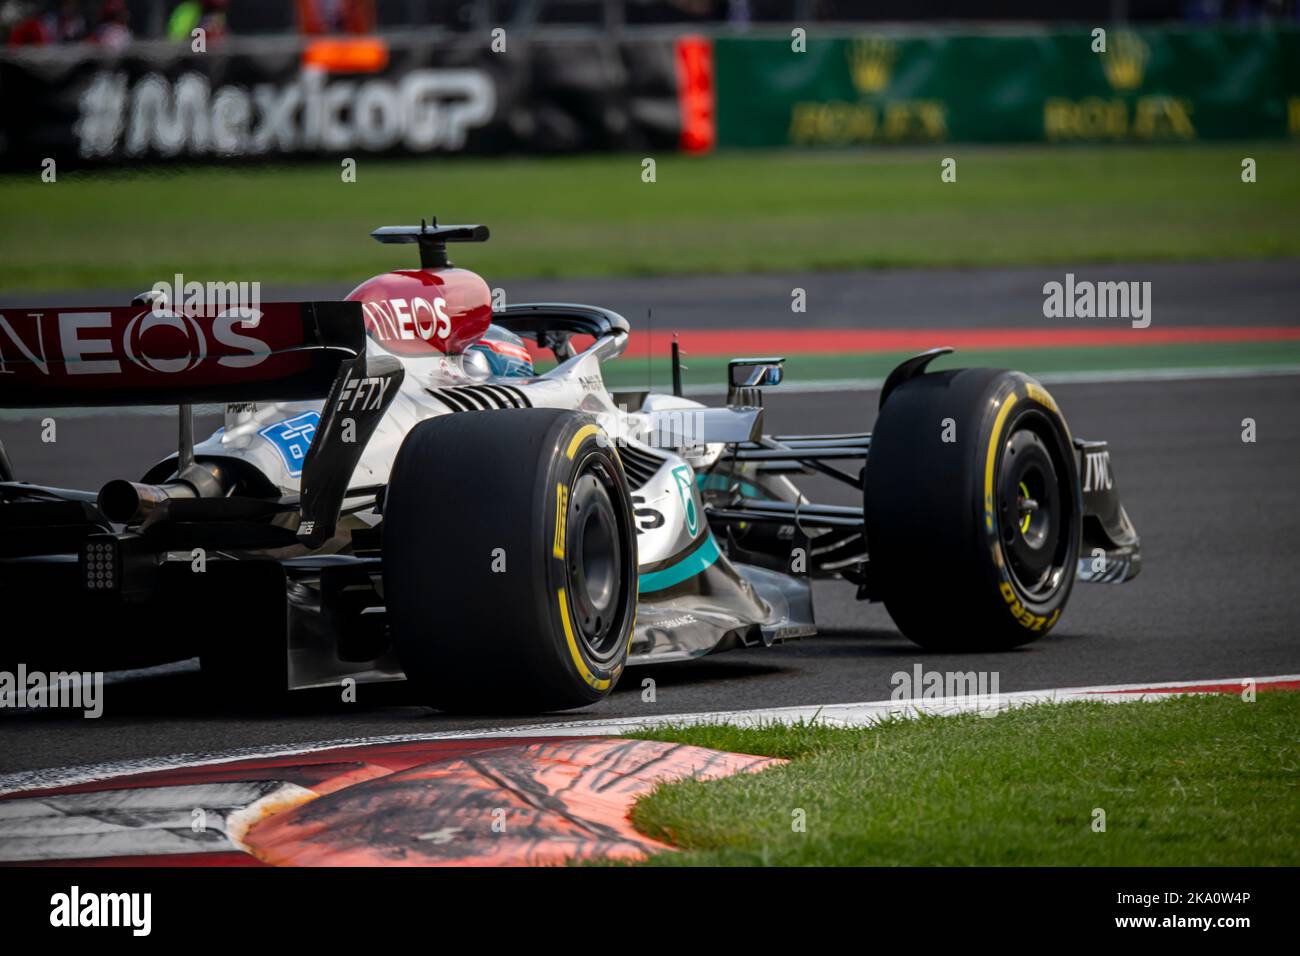 Mexico City, Mexico, 31st Oct 2022, George Russell, from the United Kingdom competes for Mercedes AMG . Race day, round 20 of the 2022 Formula 1 championship. Credit: Michael Potts/Alamy Live News Stock Photo